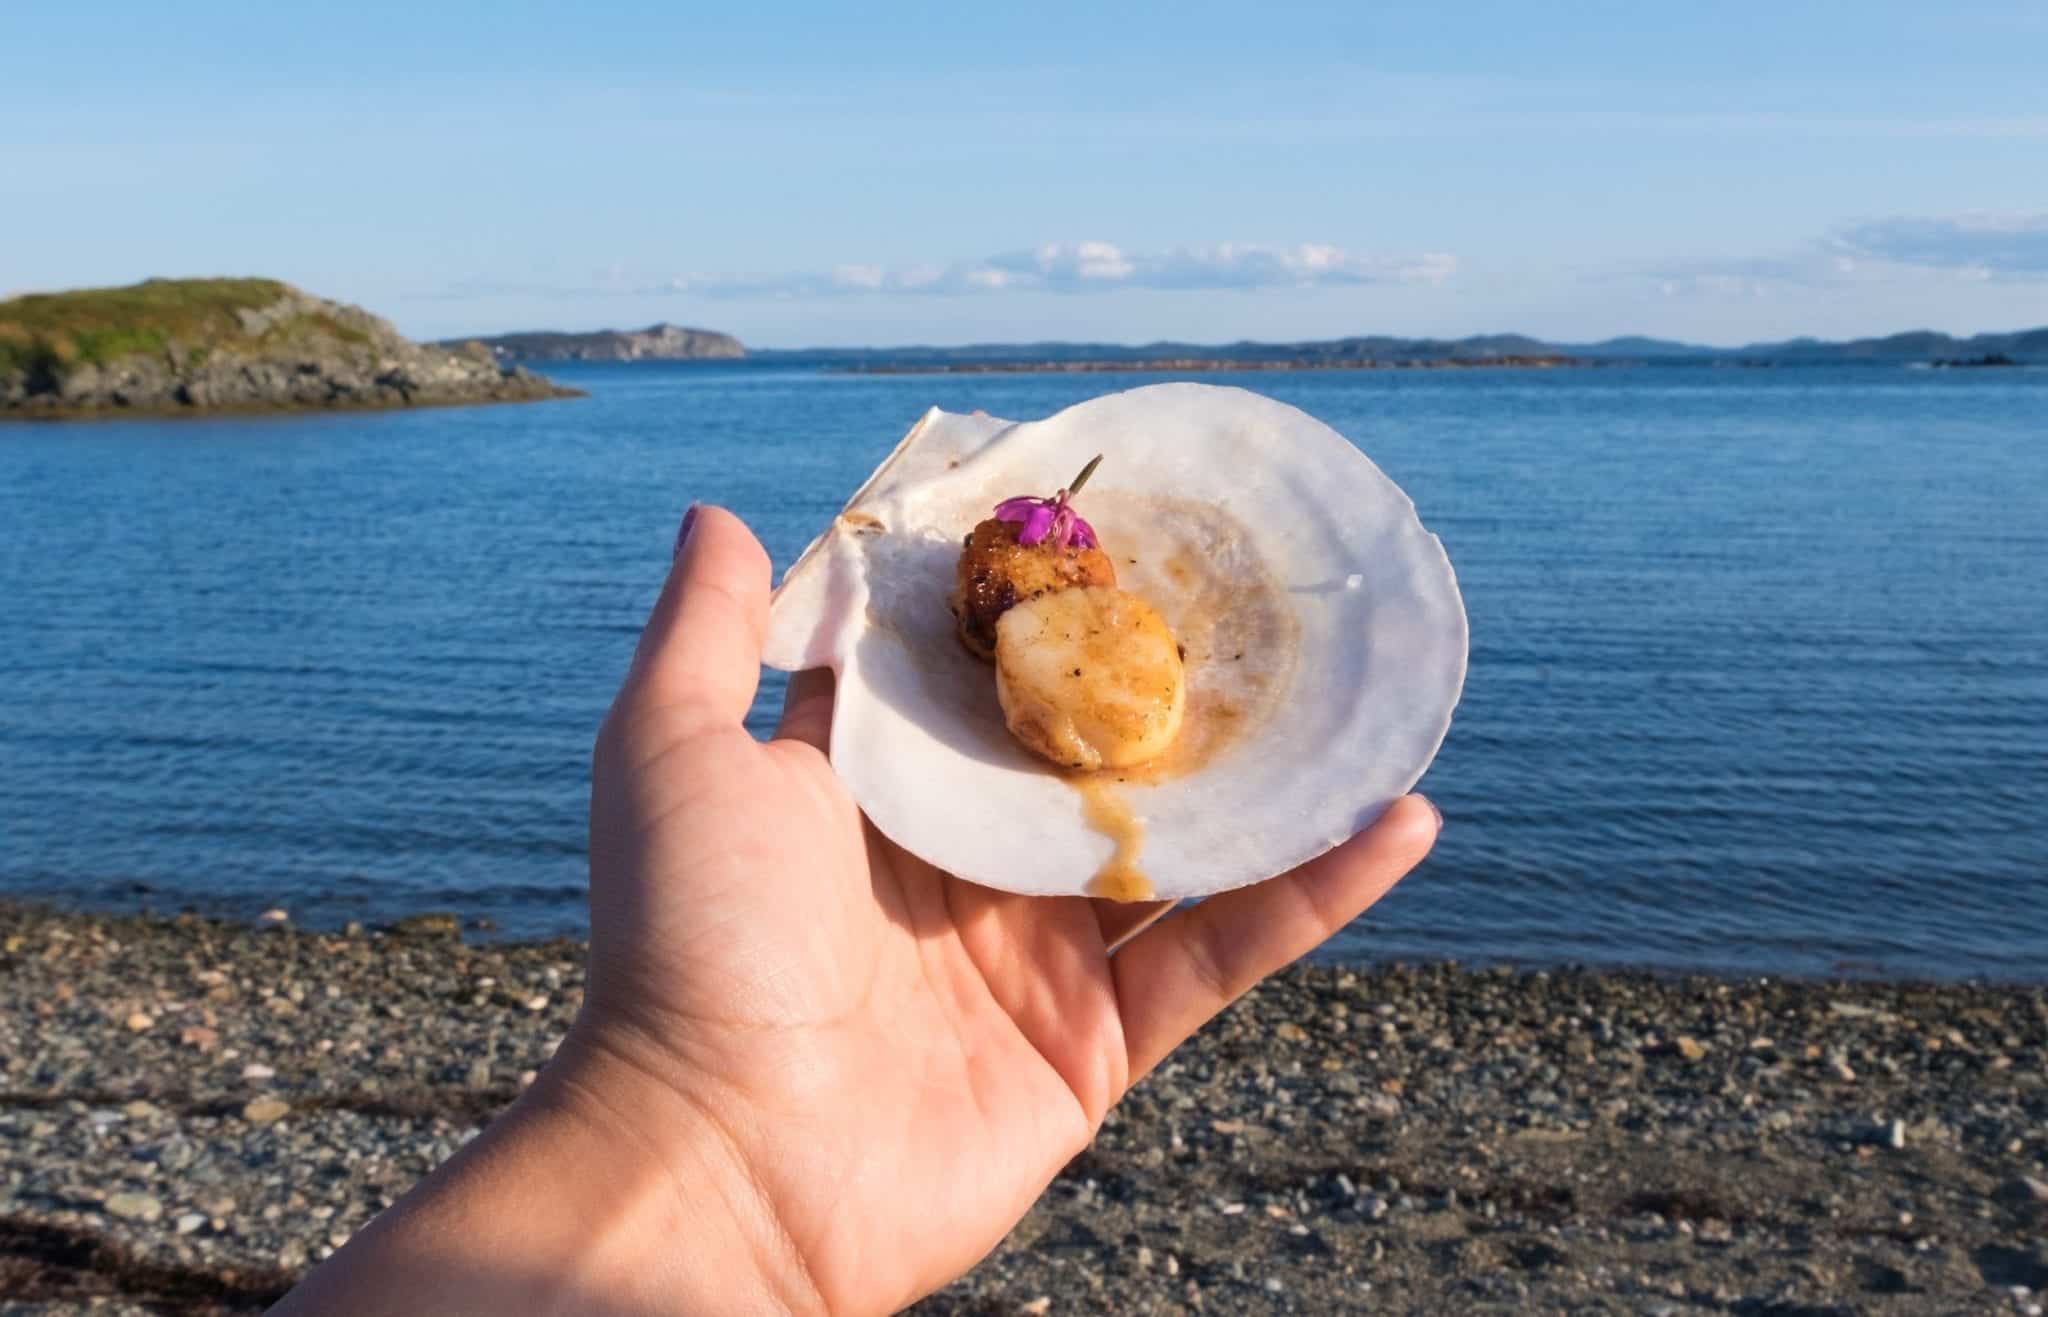 A hand holds up a scallop shell with a cooked scallop inside it, topped with a purple flower. In the background is the bright blue sea.